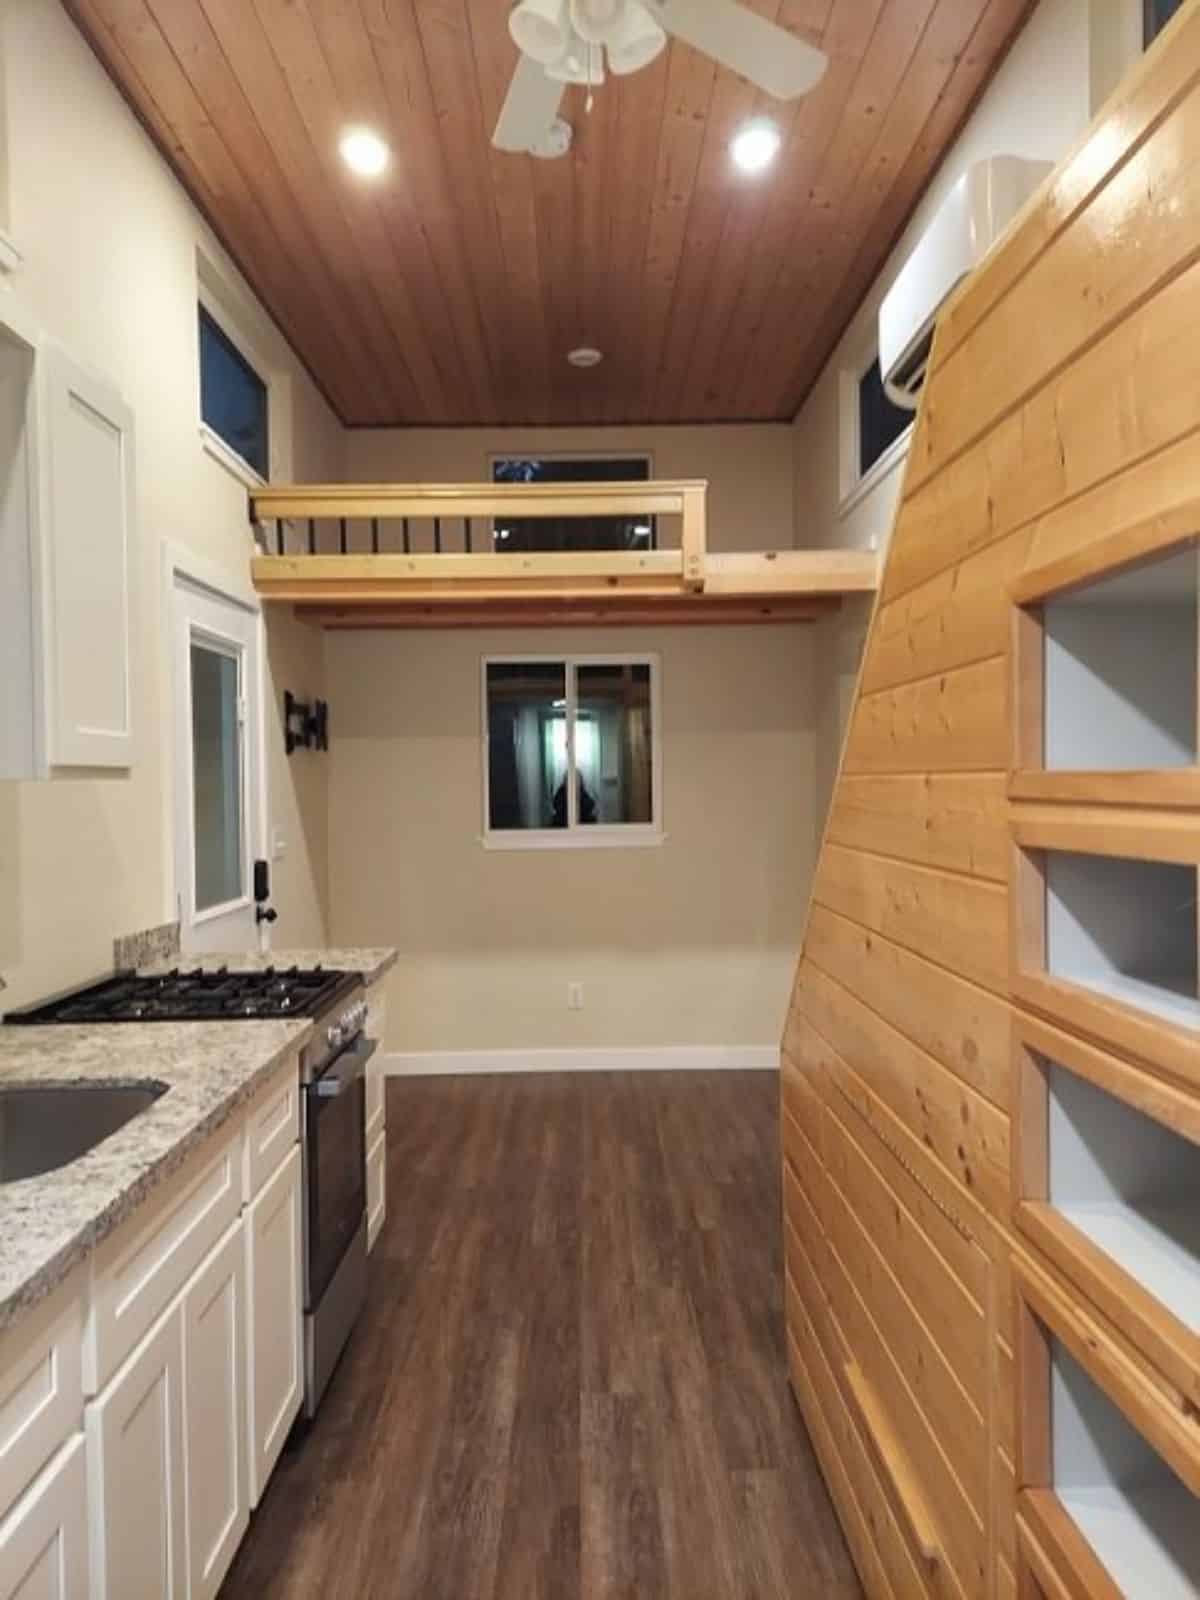 Living area of 24’ tiny house on wheels